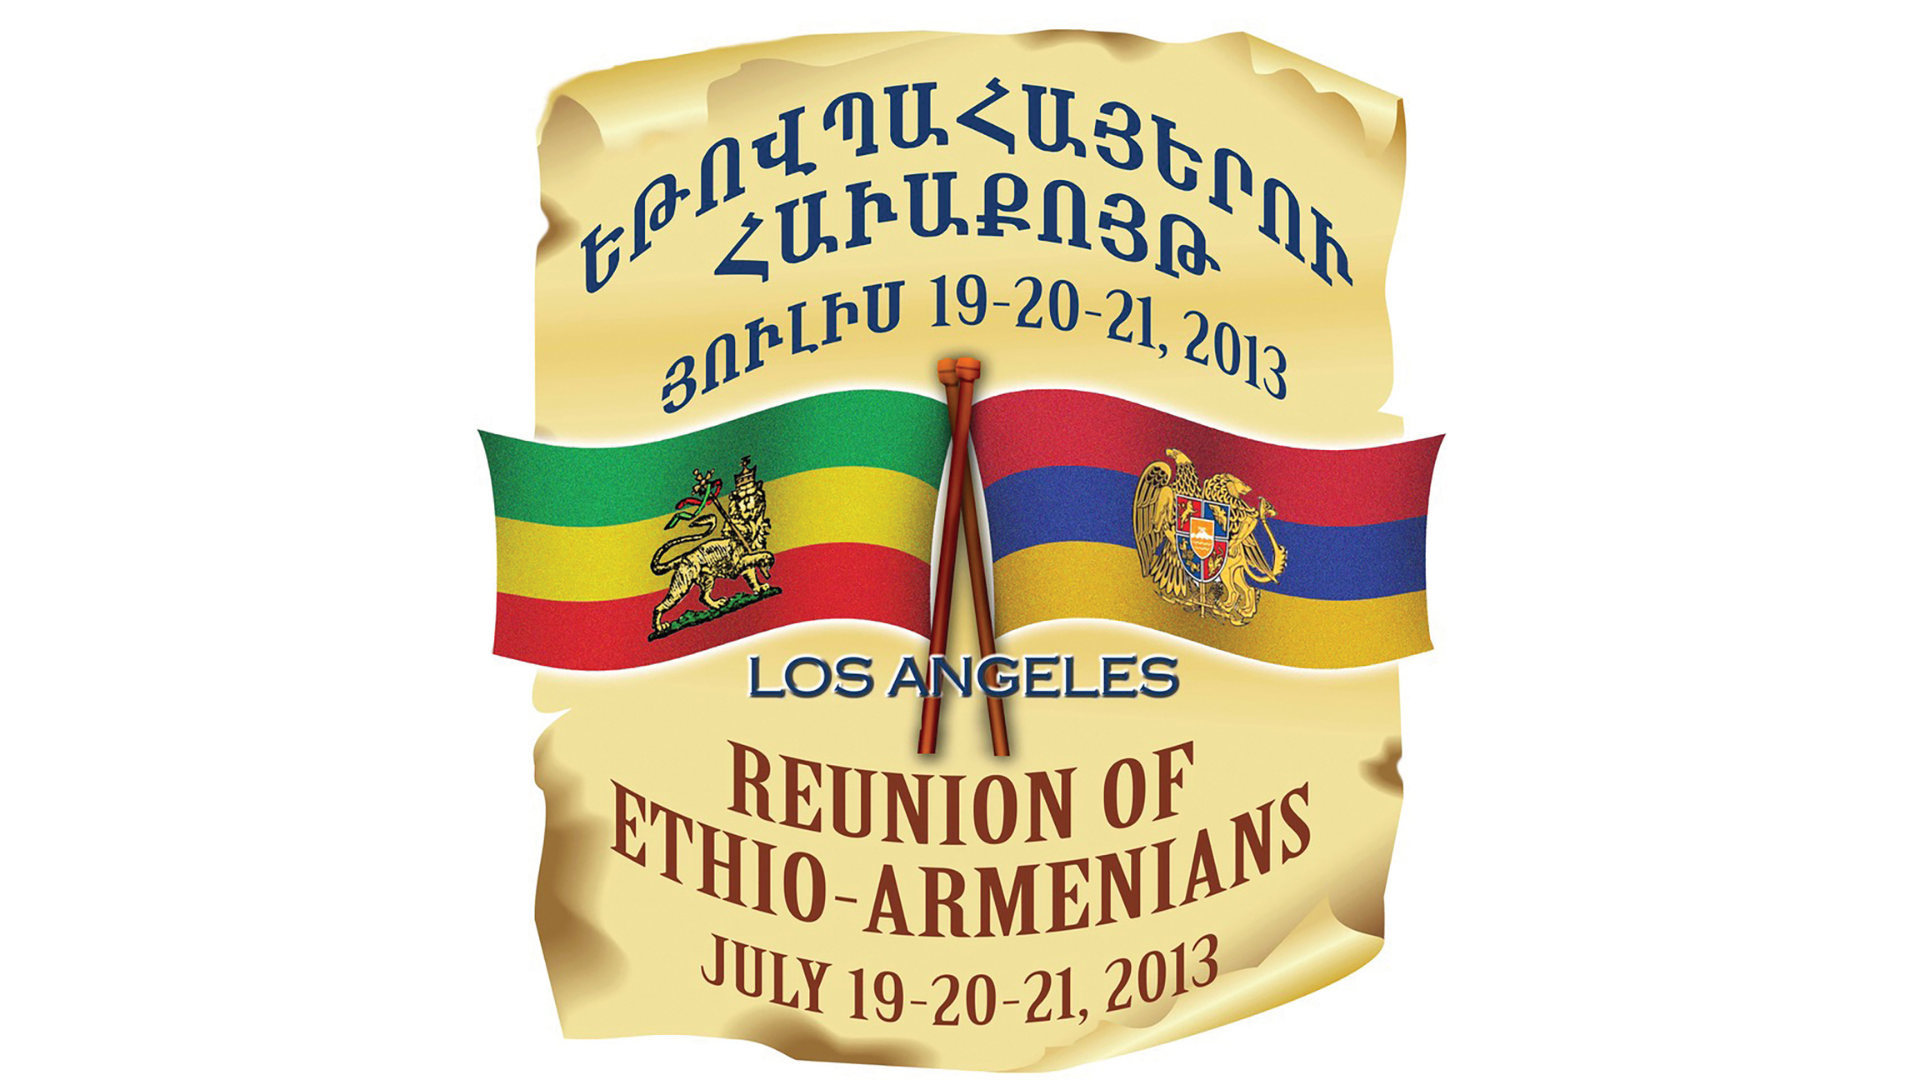 A poster for the Ethio-Armenian reunion of 2013 in Los Angeles circulated on online platforms. 